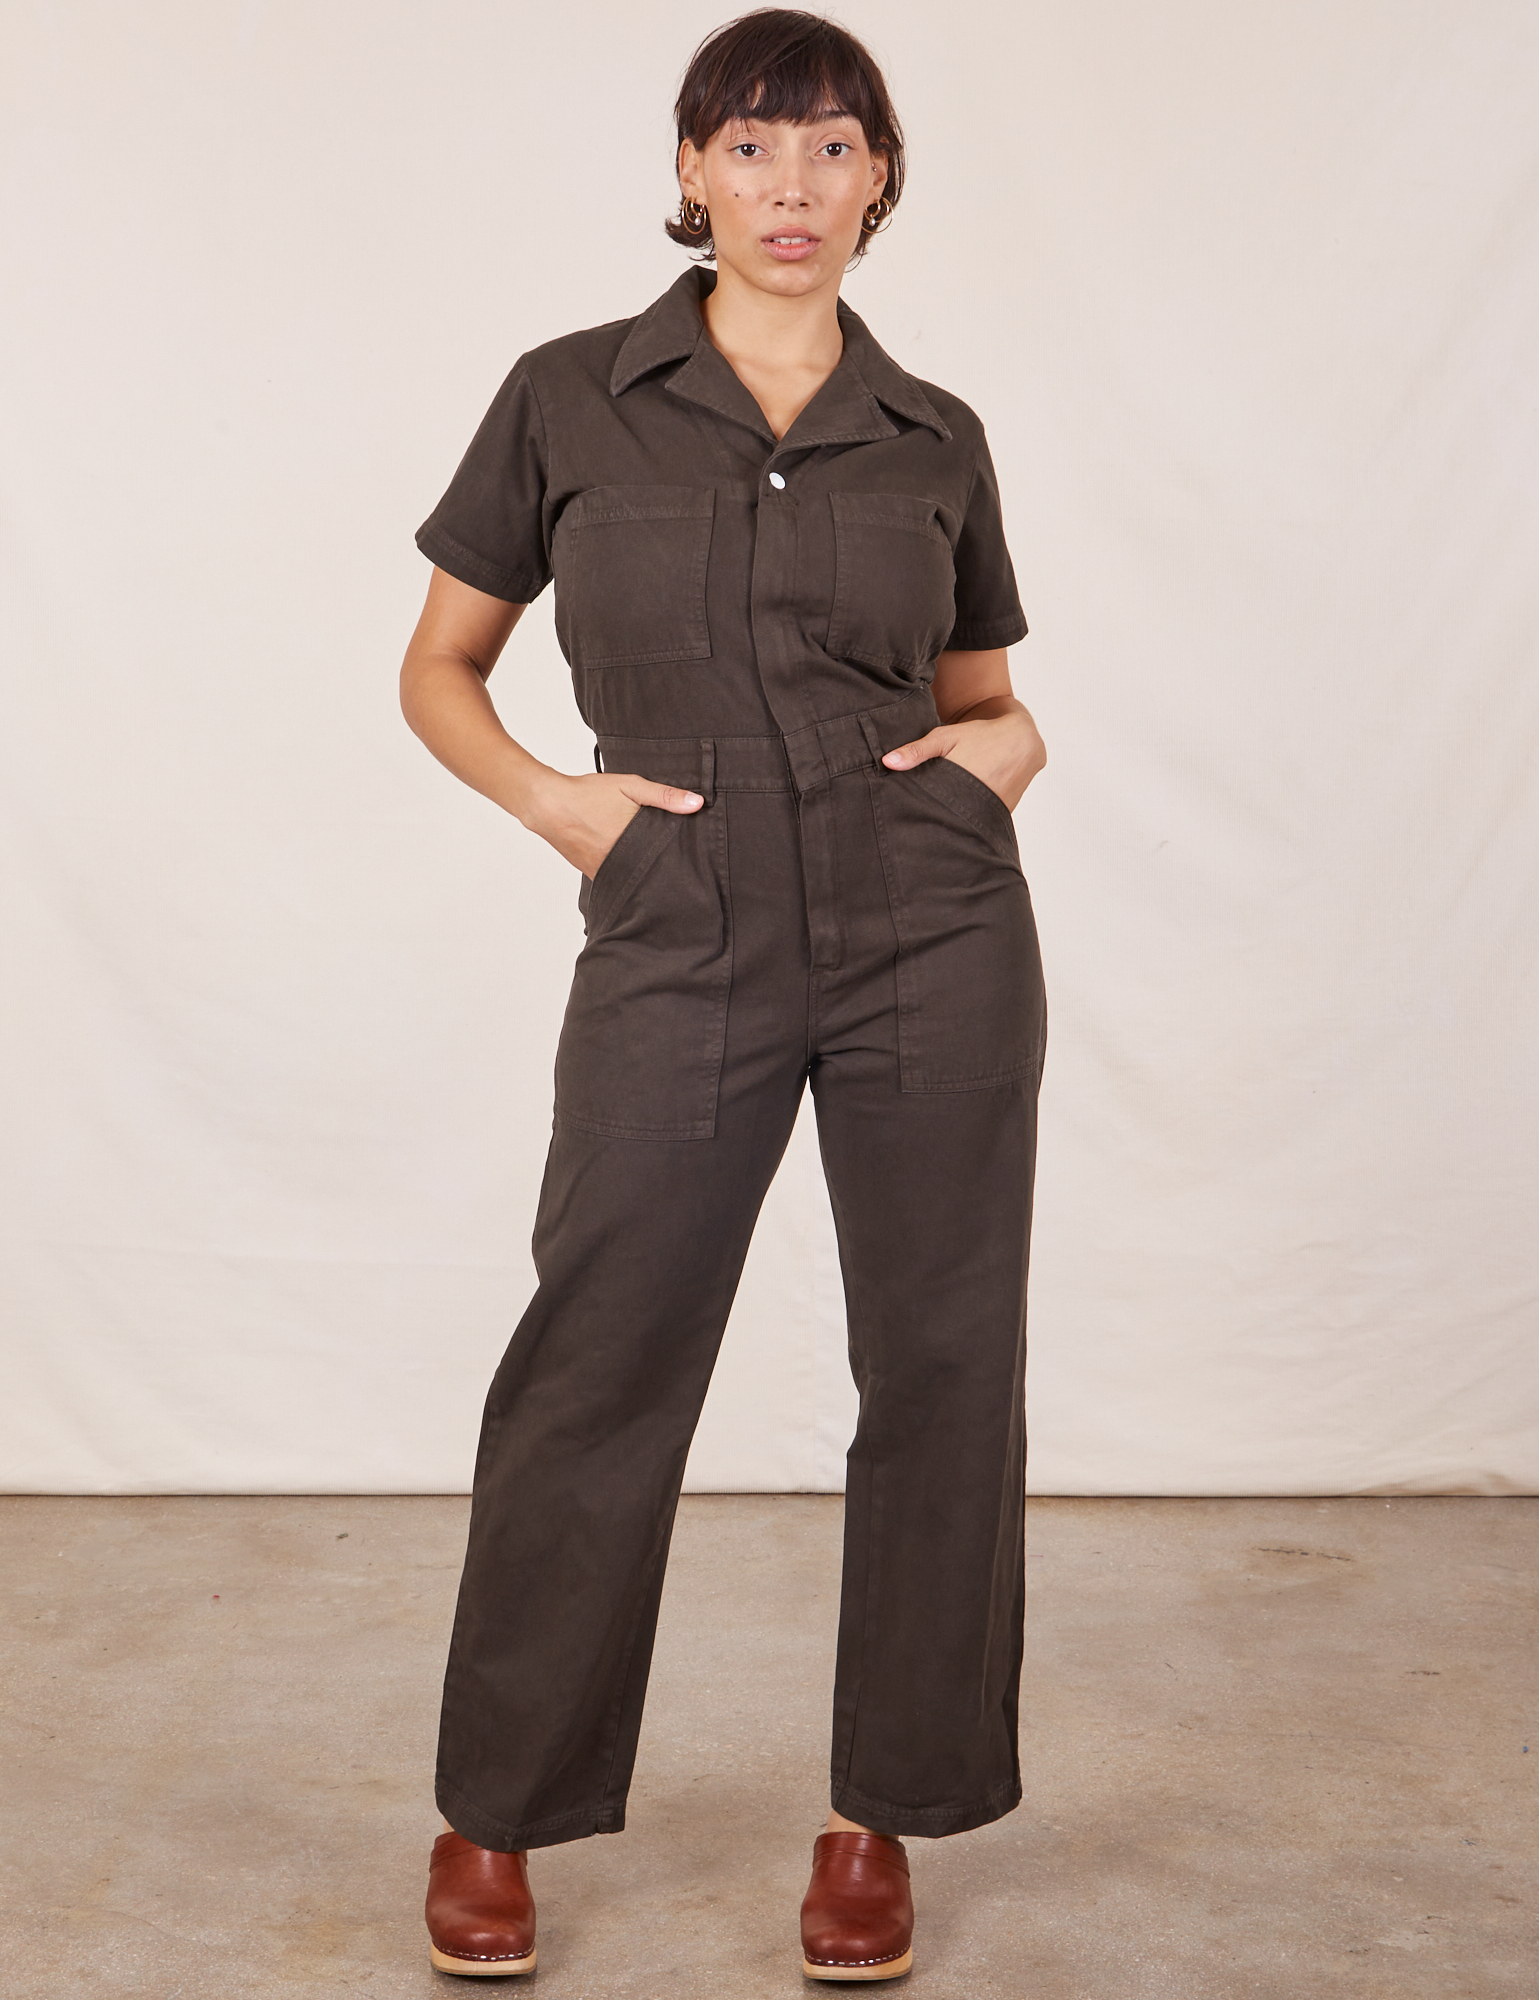 Tiara is 5'4" and wearing S Short Sleeve Jumpsuit in Espresso Brown 